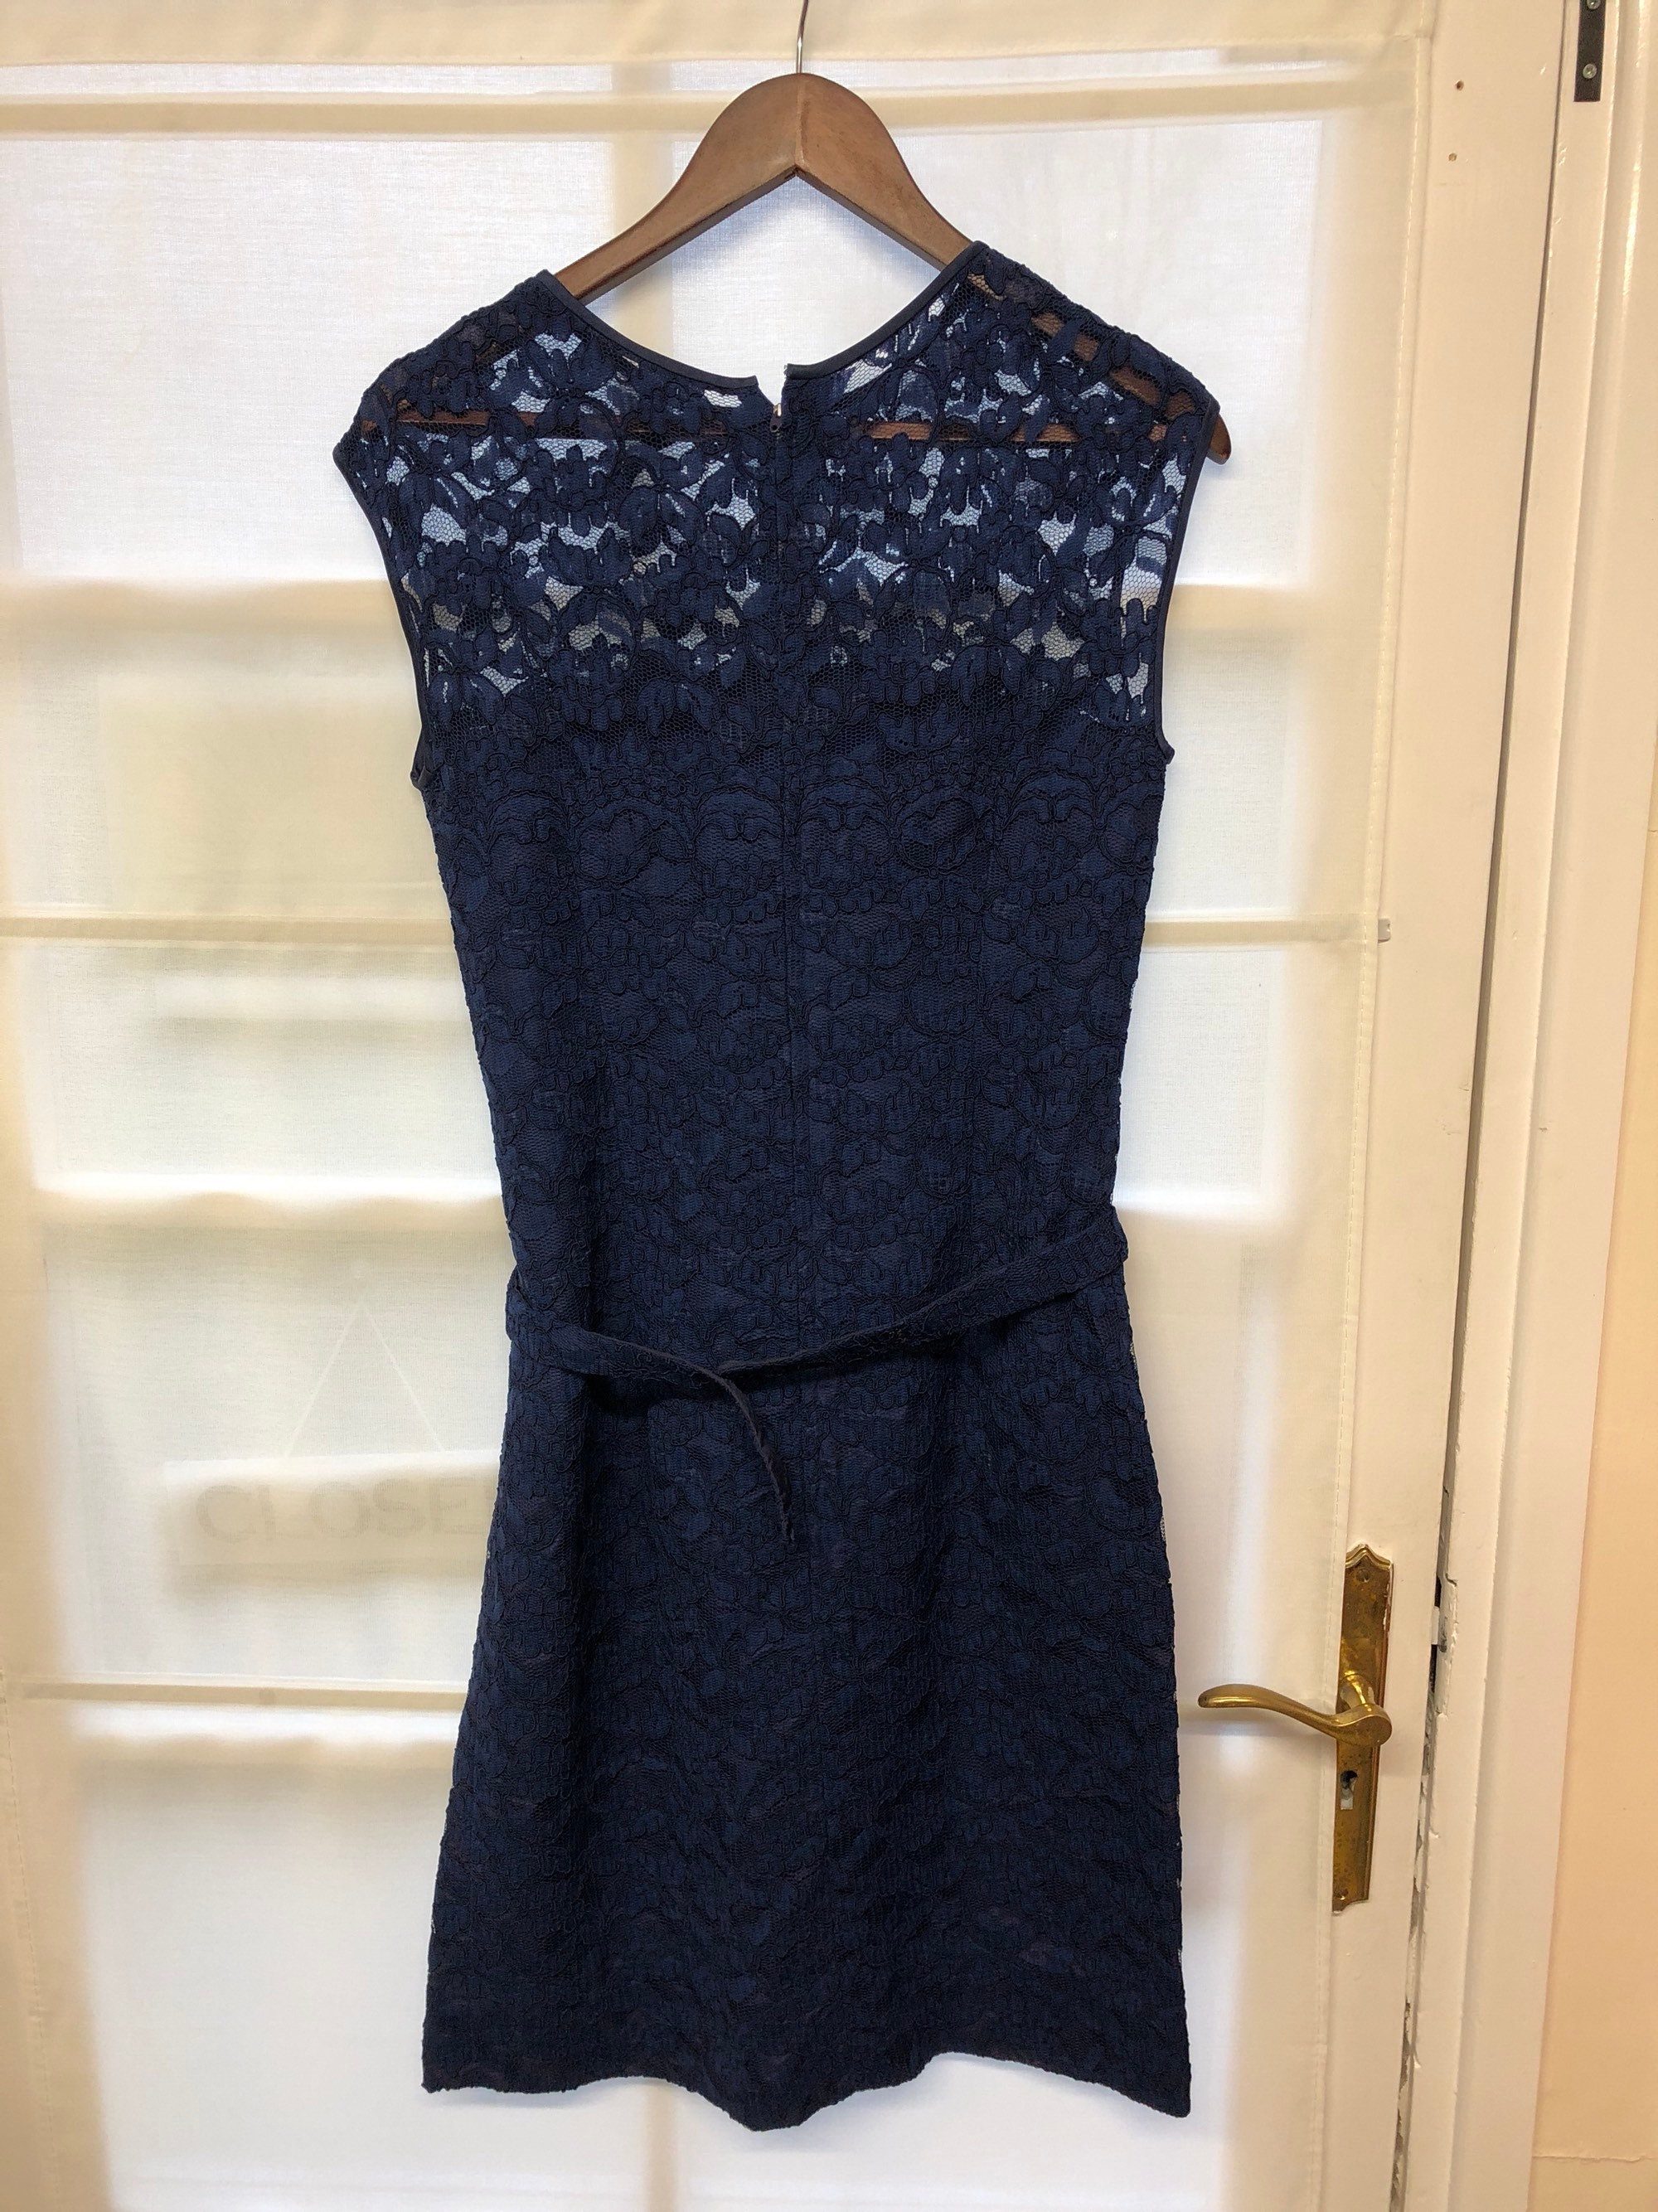 Margot Bywaters London navy blue lace dress and jacket wuth | Etsy